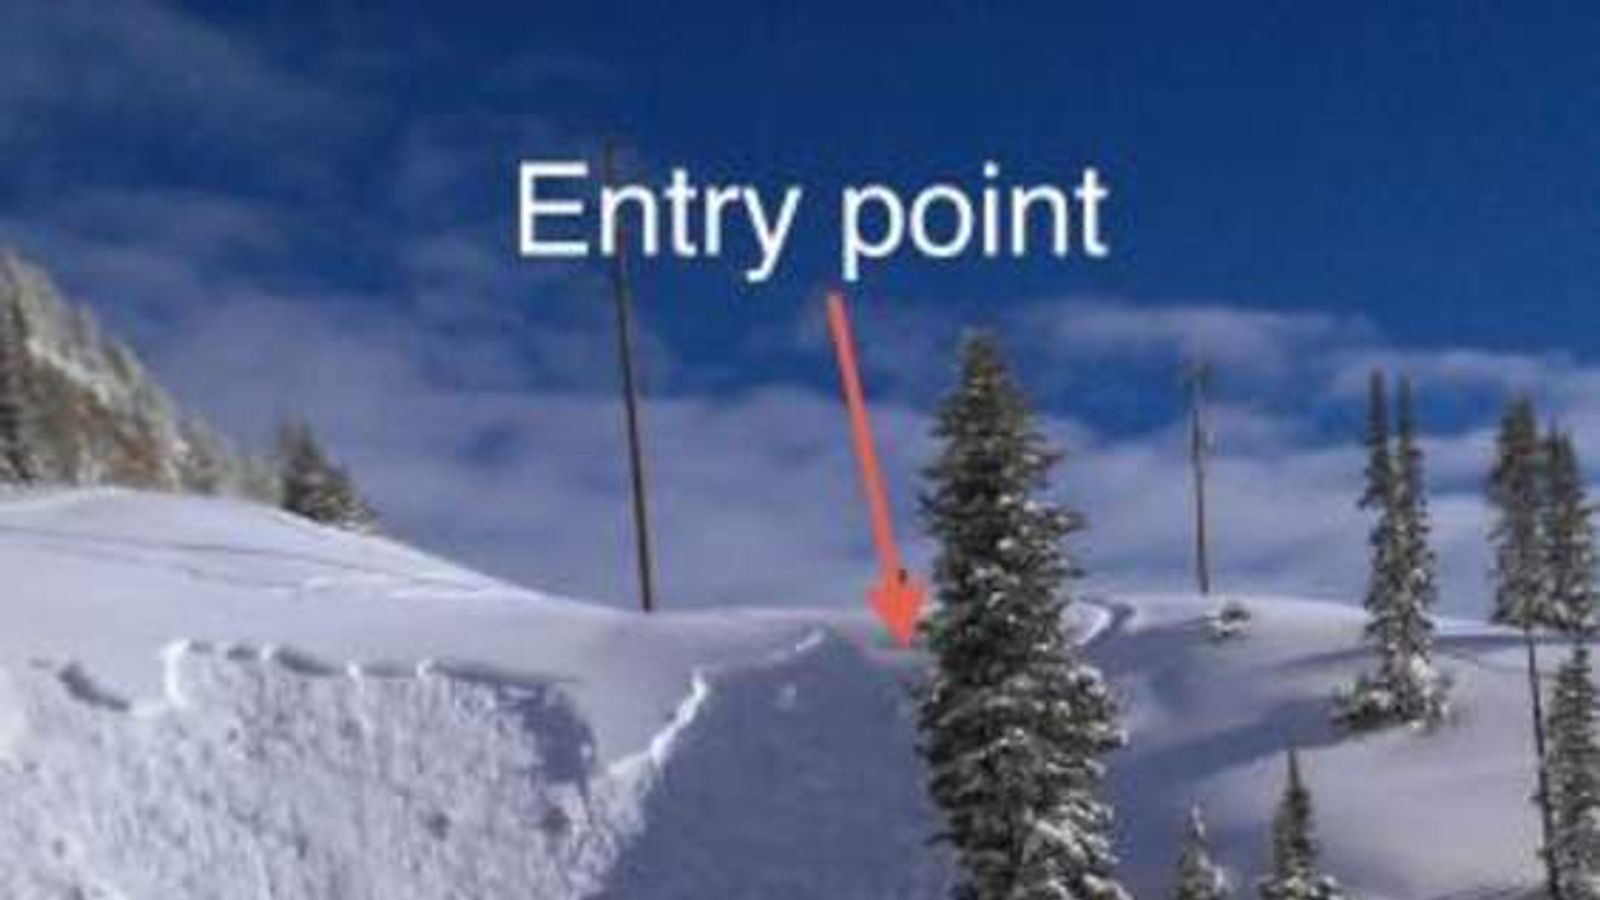 Us Off Piste Skier Survives Avalanche Fall Us News Sky News 0783